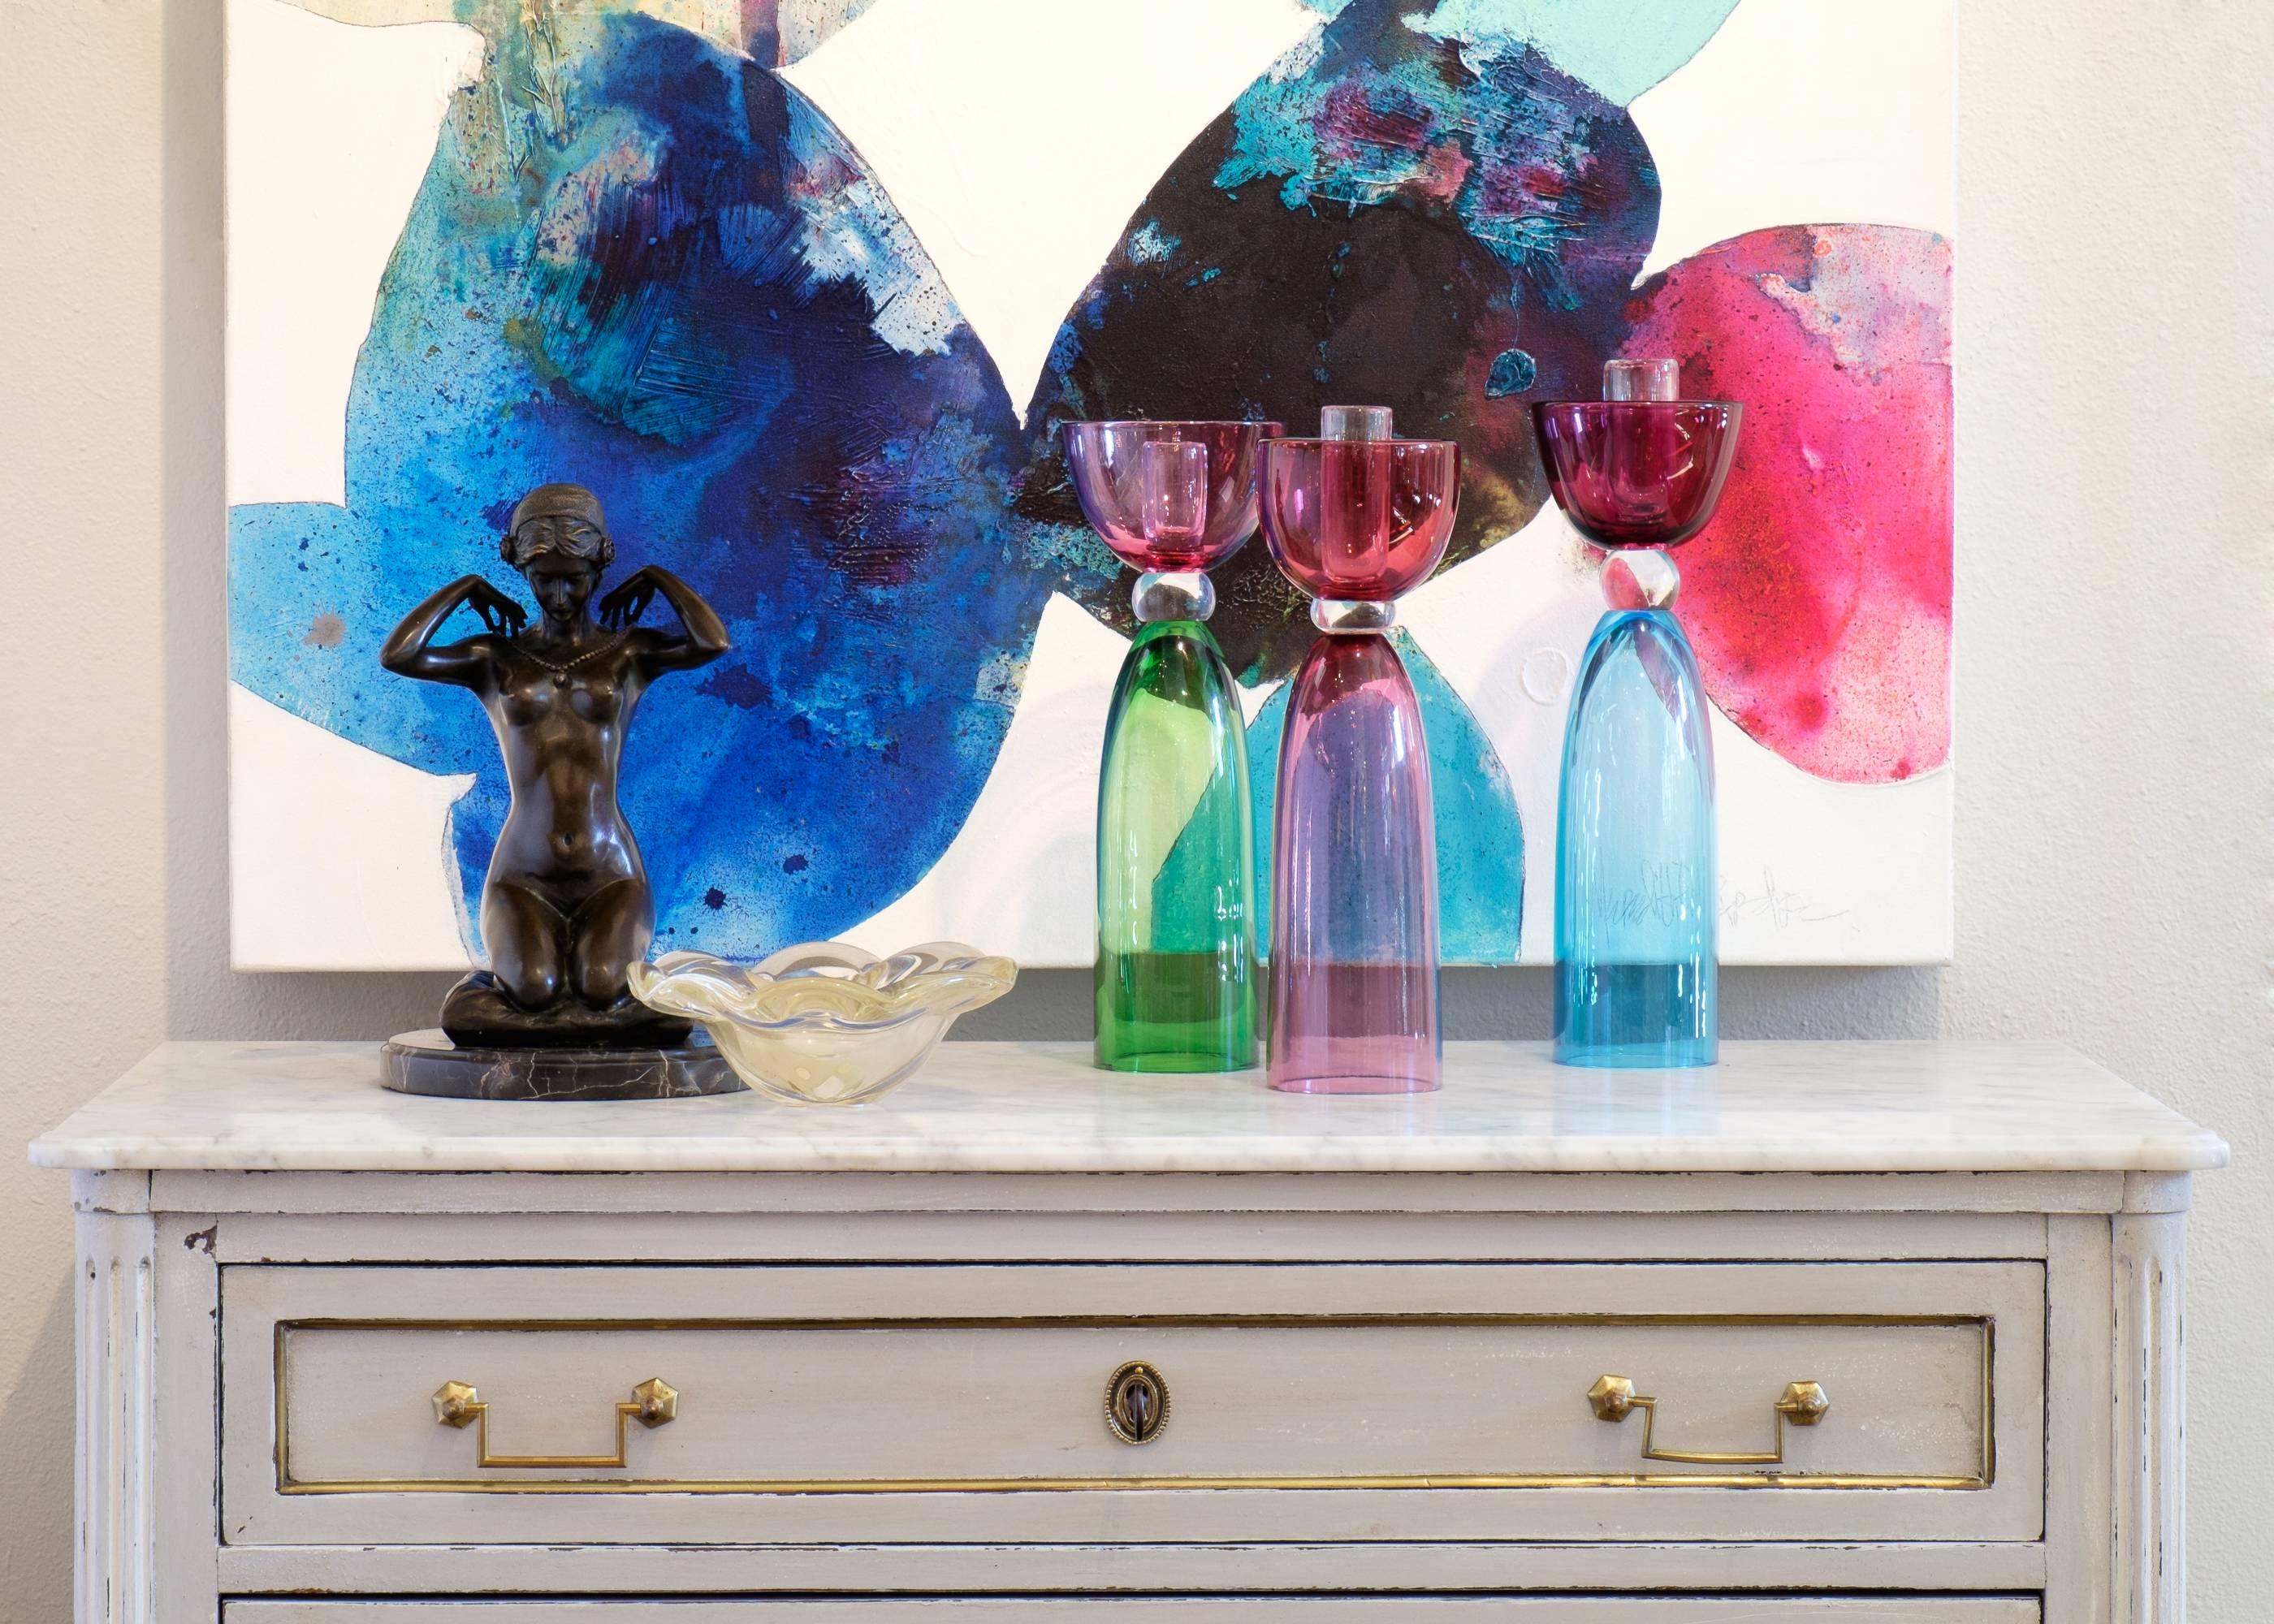 Vintage Italian set of three Murano glass candlesticks in pink amethyst, cerulean blue, and spring green with crystal clear accents. Such good colors.